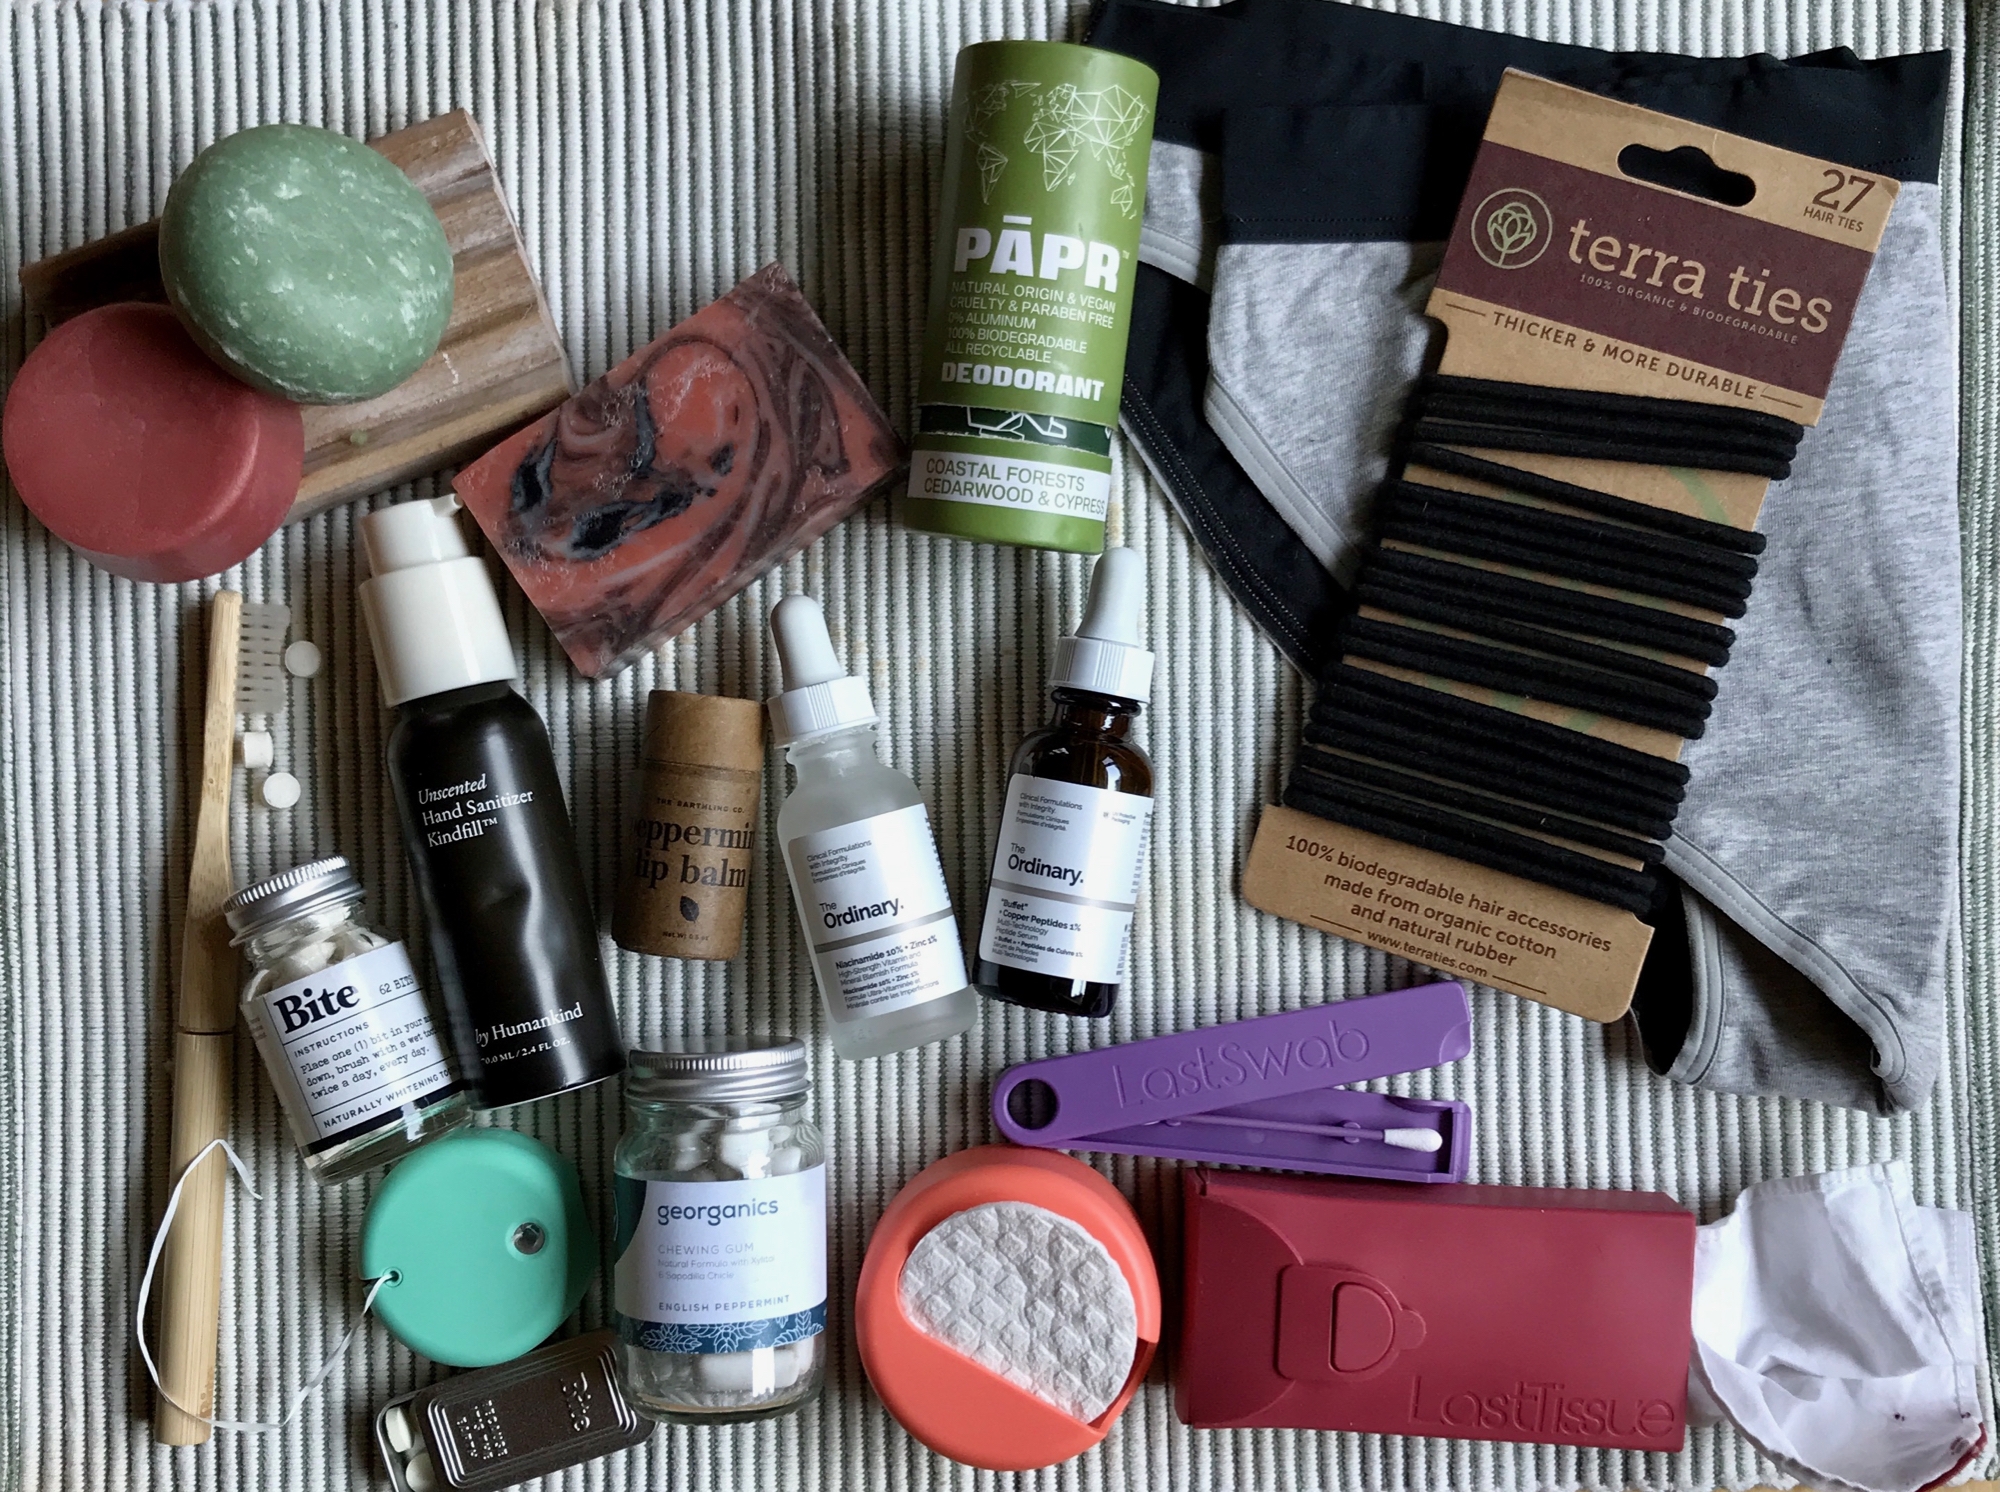 My zero-waste toiletry routine (including glass bottled products from DECIEM, a brand that has a TerraCycle recycling program, and many plastic-free options) sitting on a light green cloth. ©KettiWilhelm2021